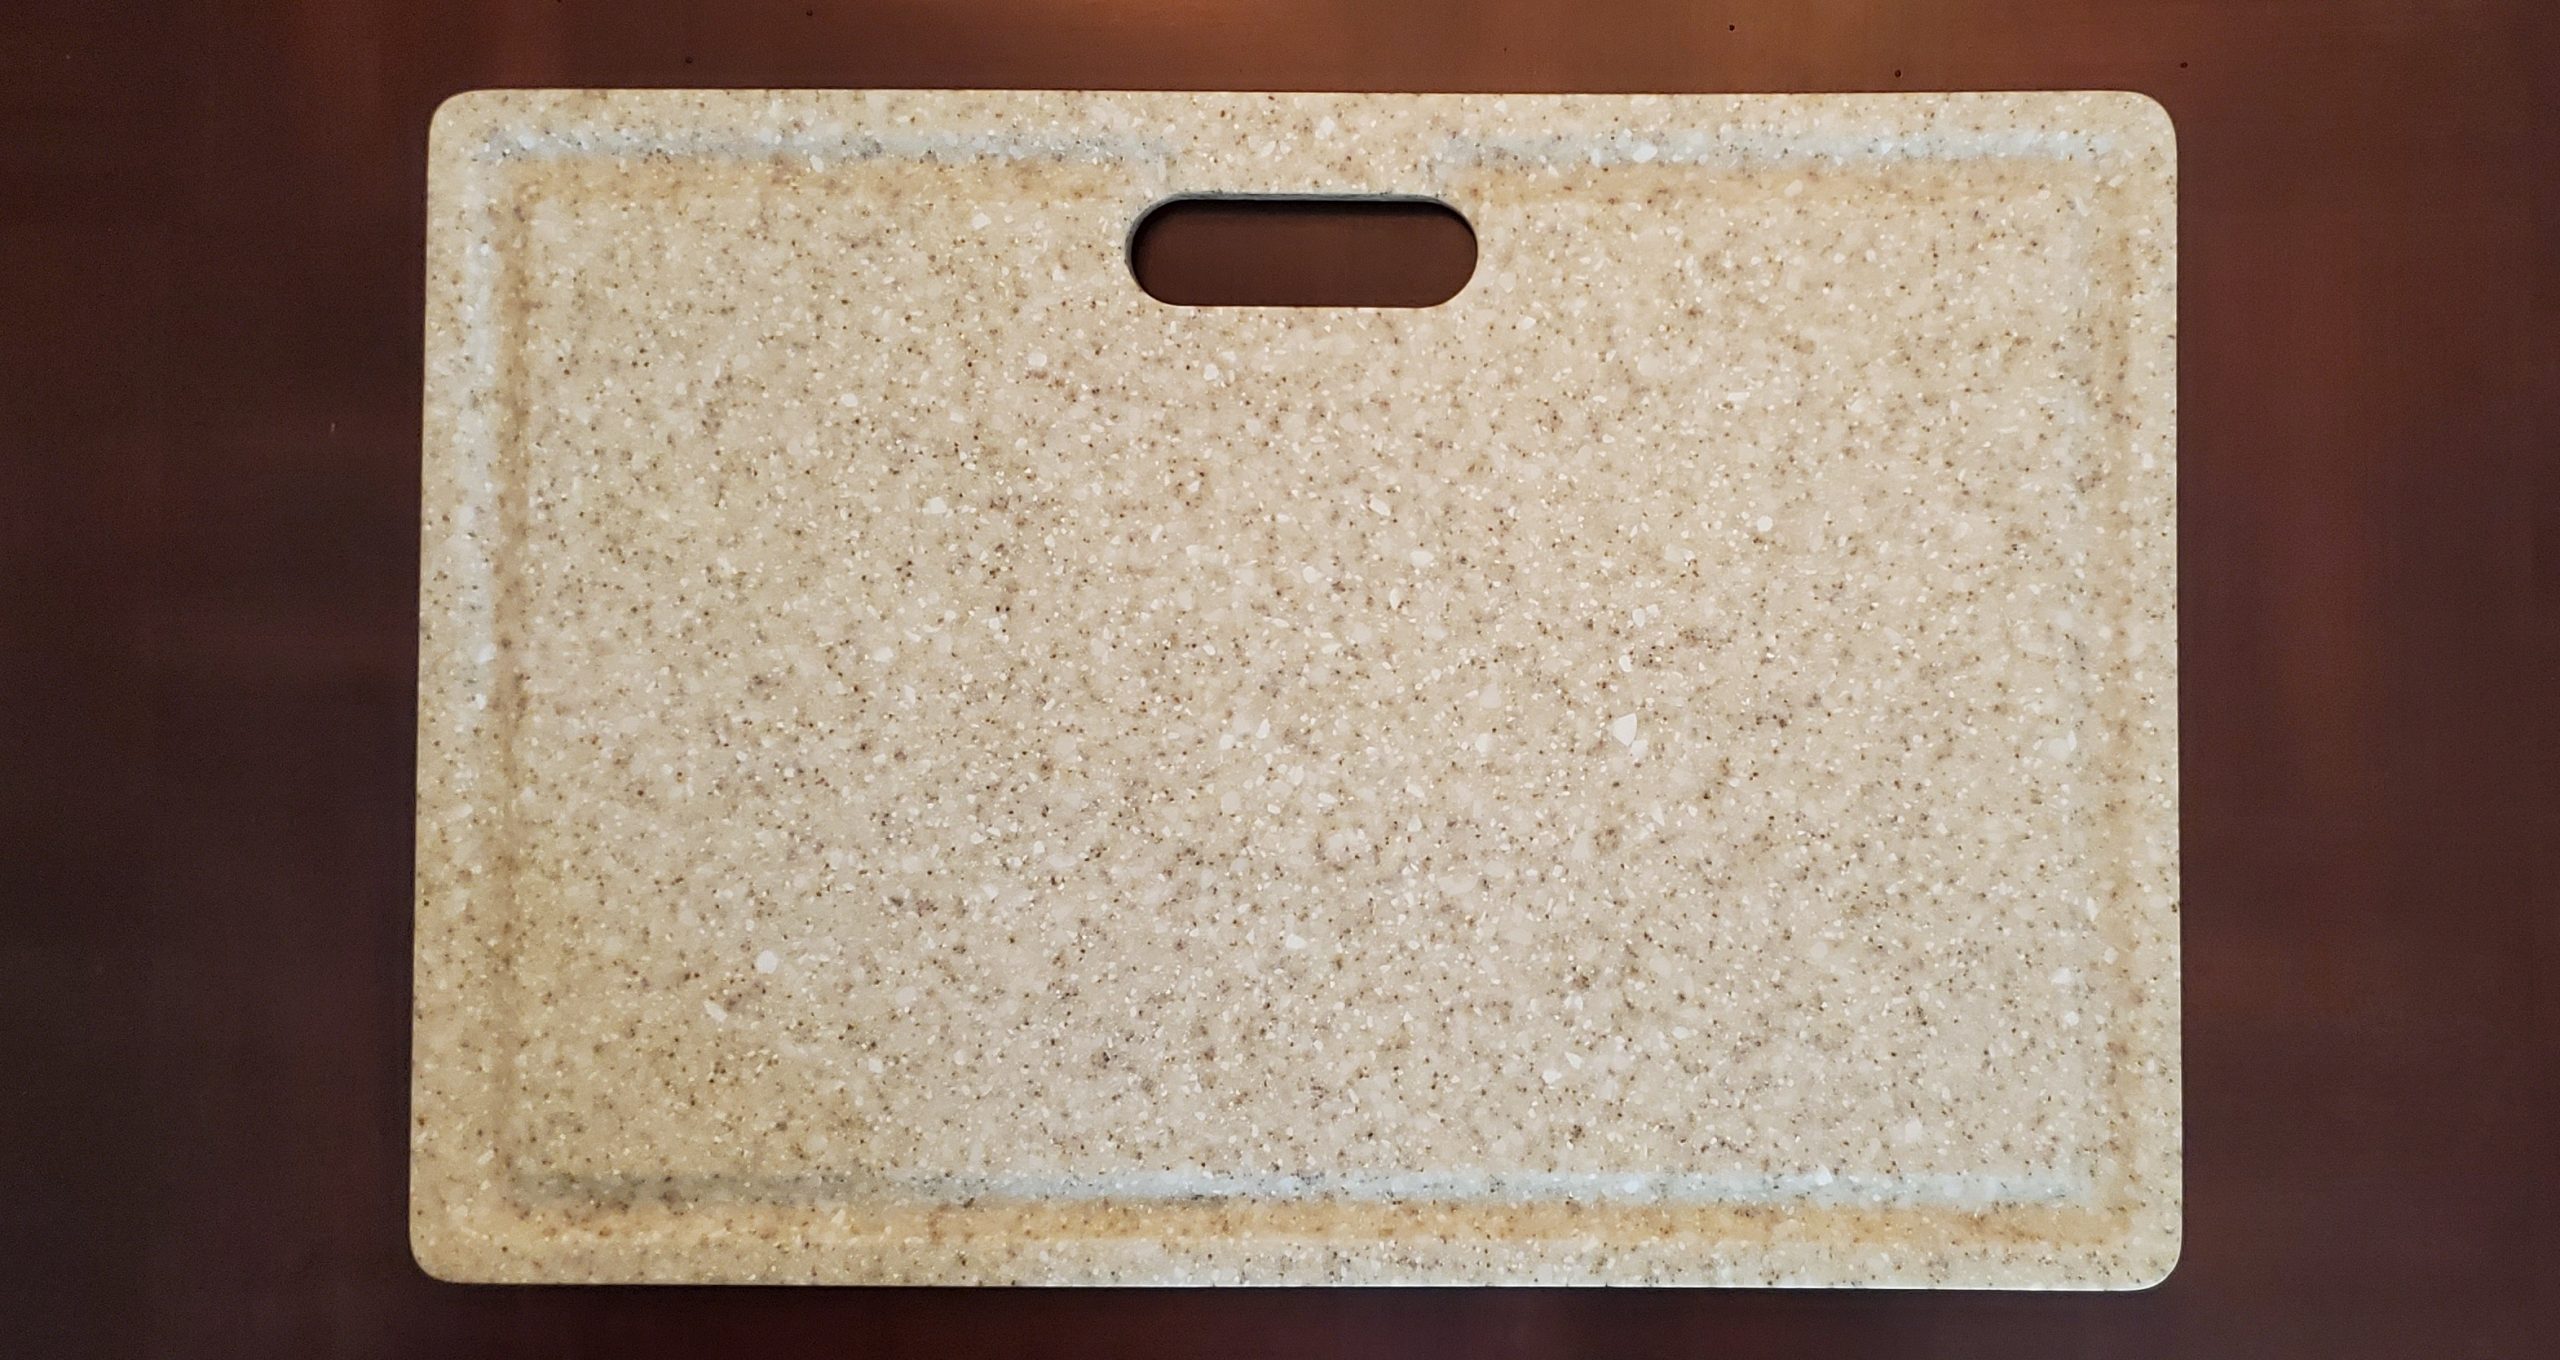 corian like cutting boards .5x10x16 numerous colors rounded edge solid surface